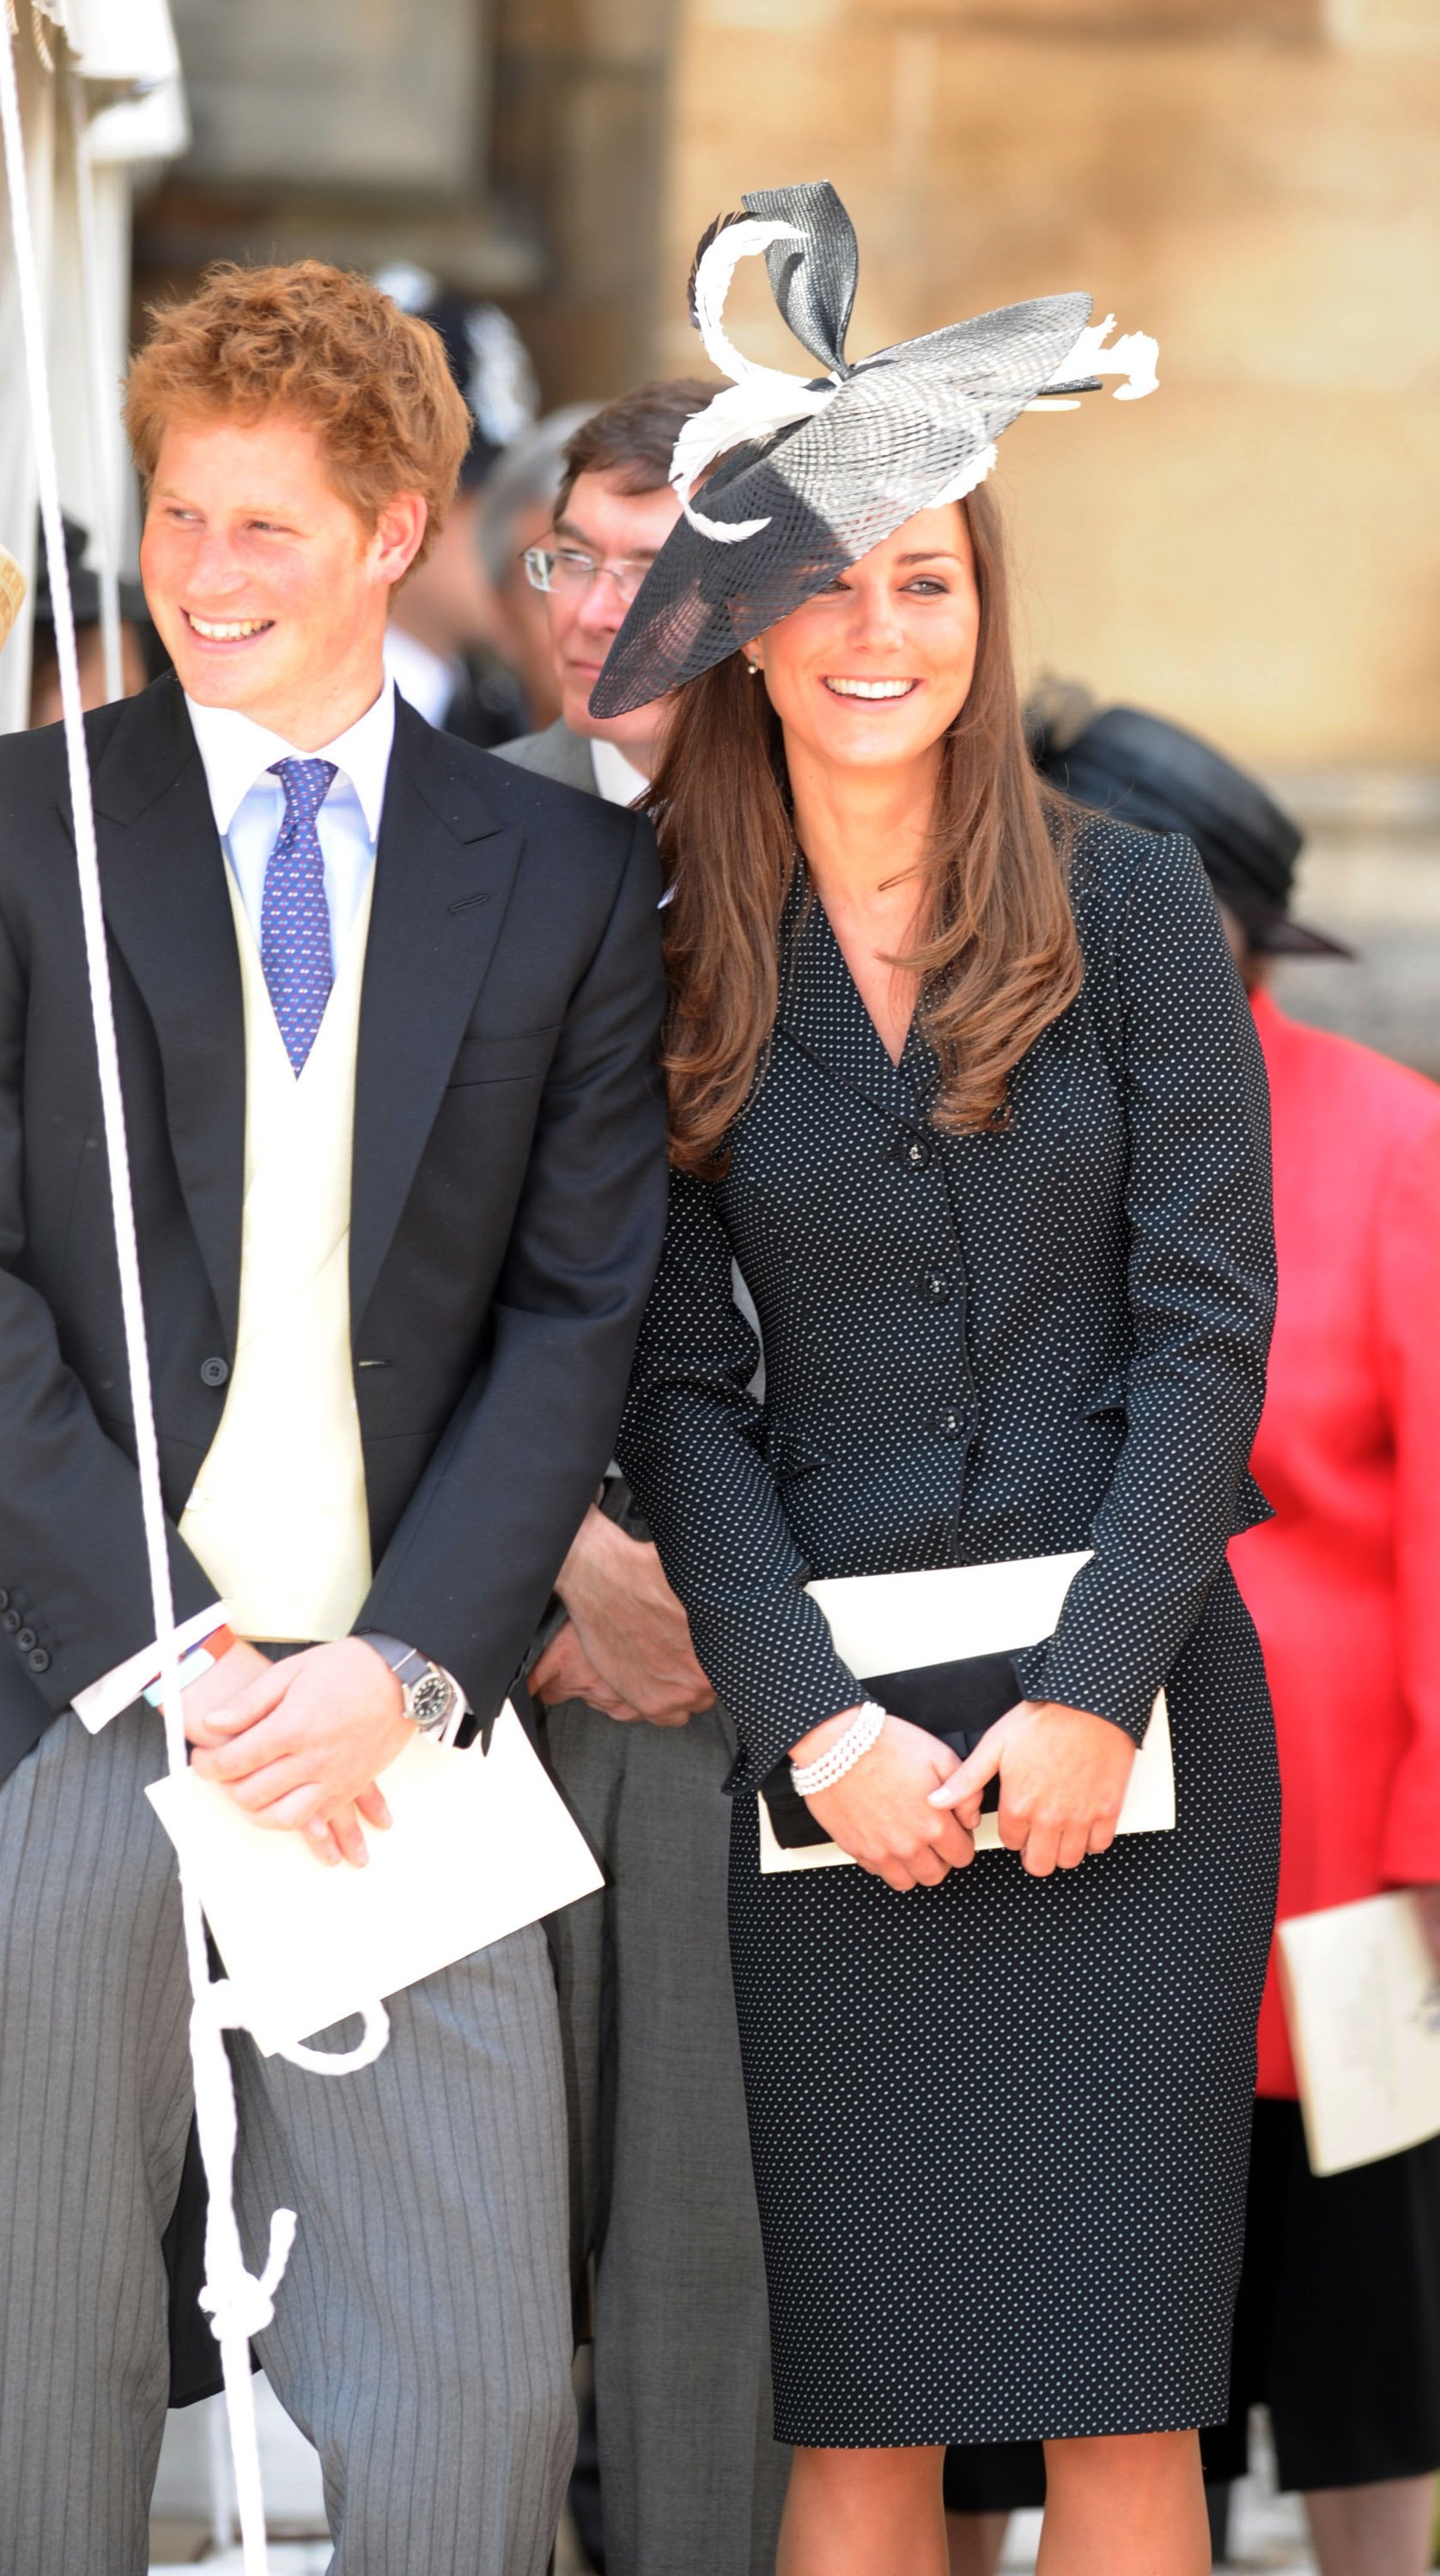 Prince Harry and Prince William's girlfriend Kate Middleton laugh together as they watch the Order of the Garter procession at Windsor Castle on June 16, 2008 in Windsor, England | Source: Getty Images